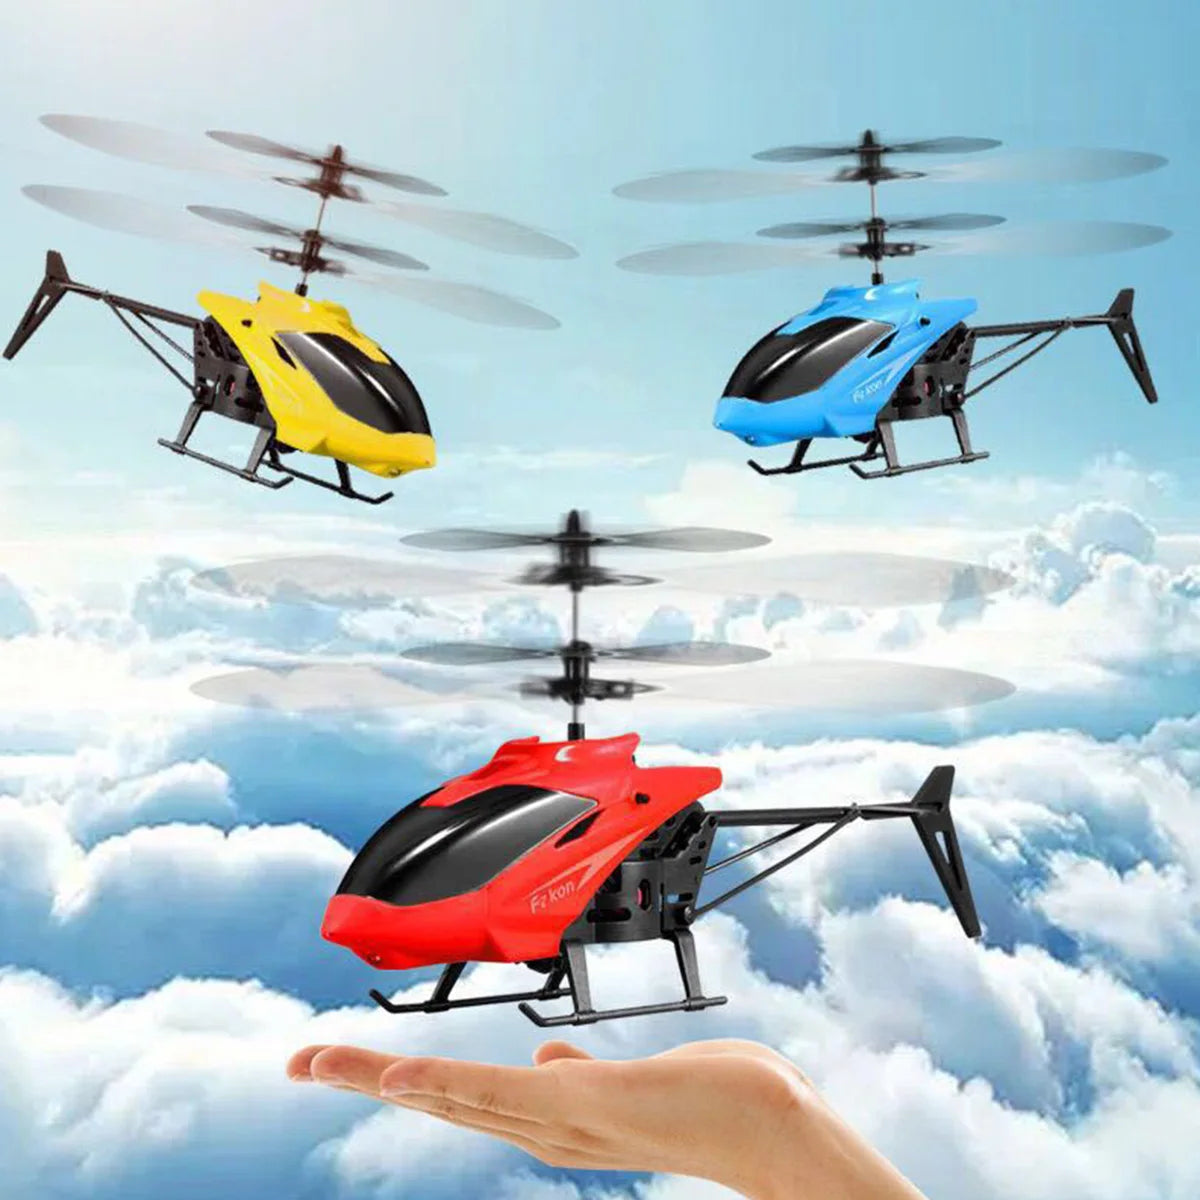 CY-38 Rc Helicopter - RC Toy Aircraft Induction